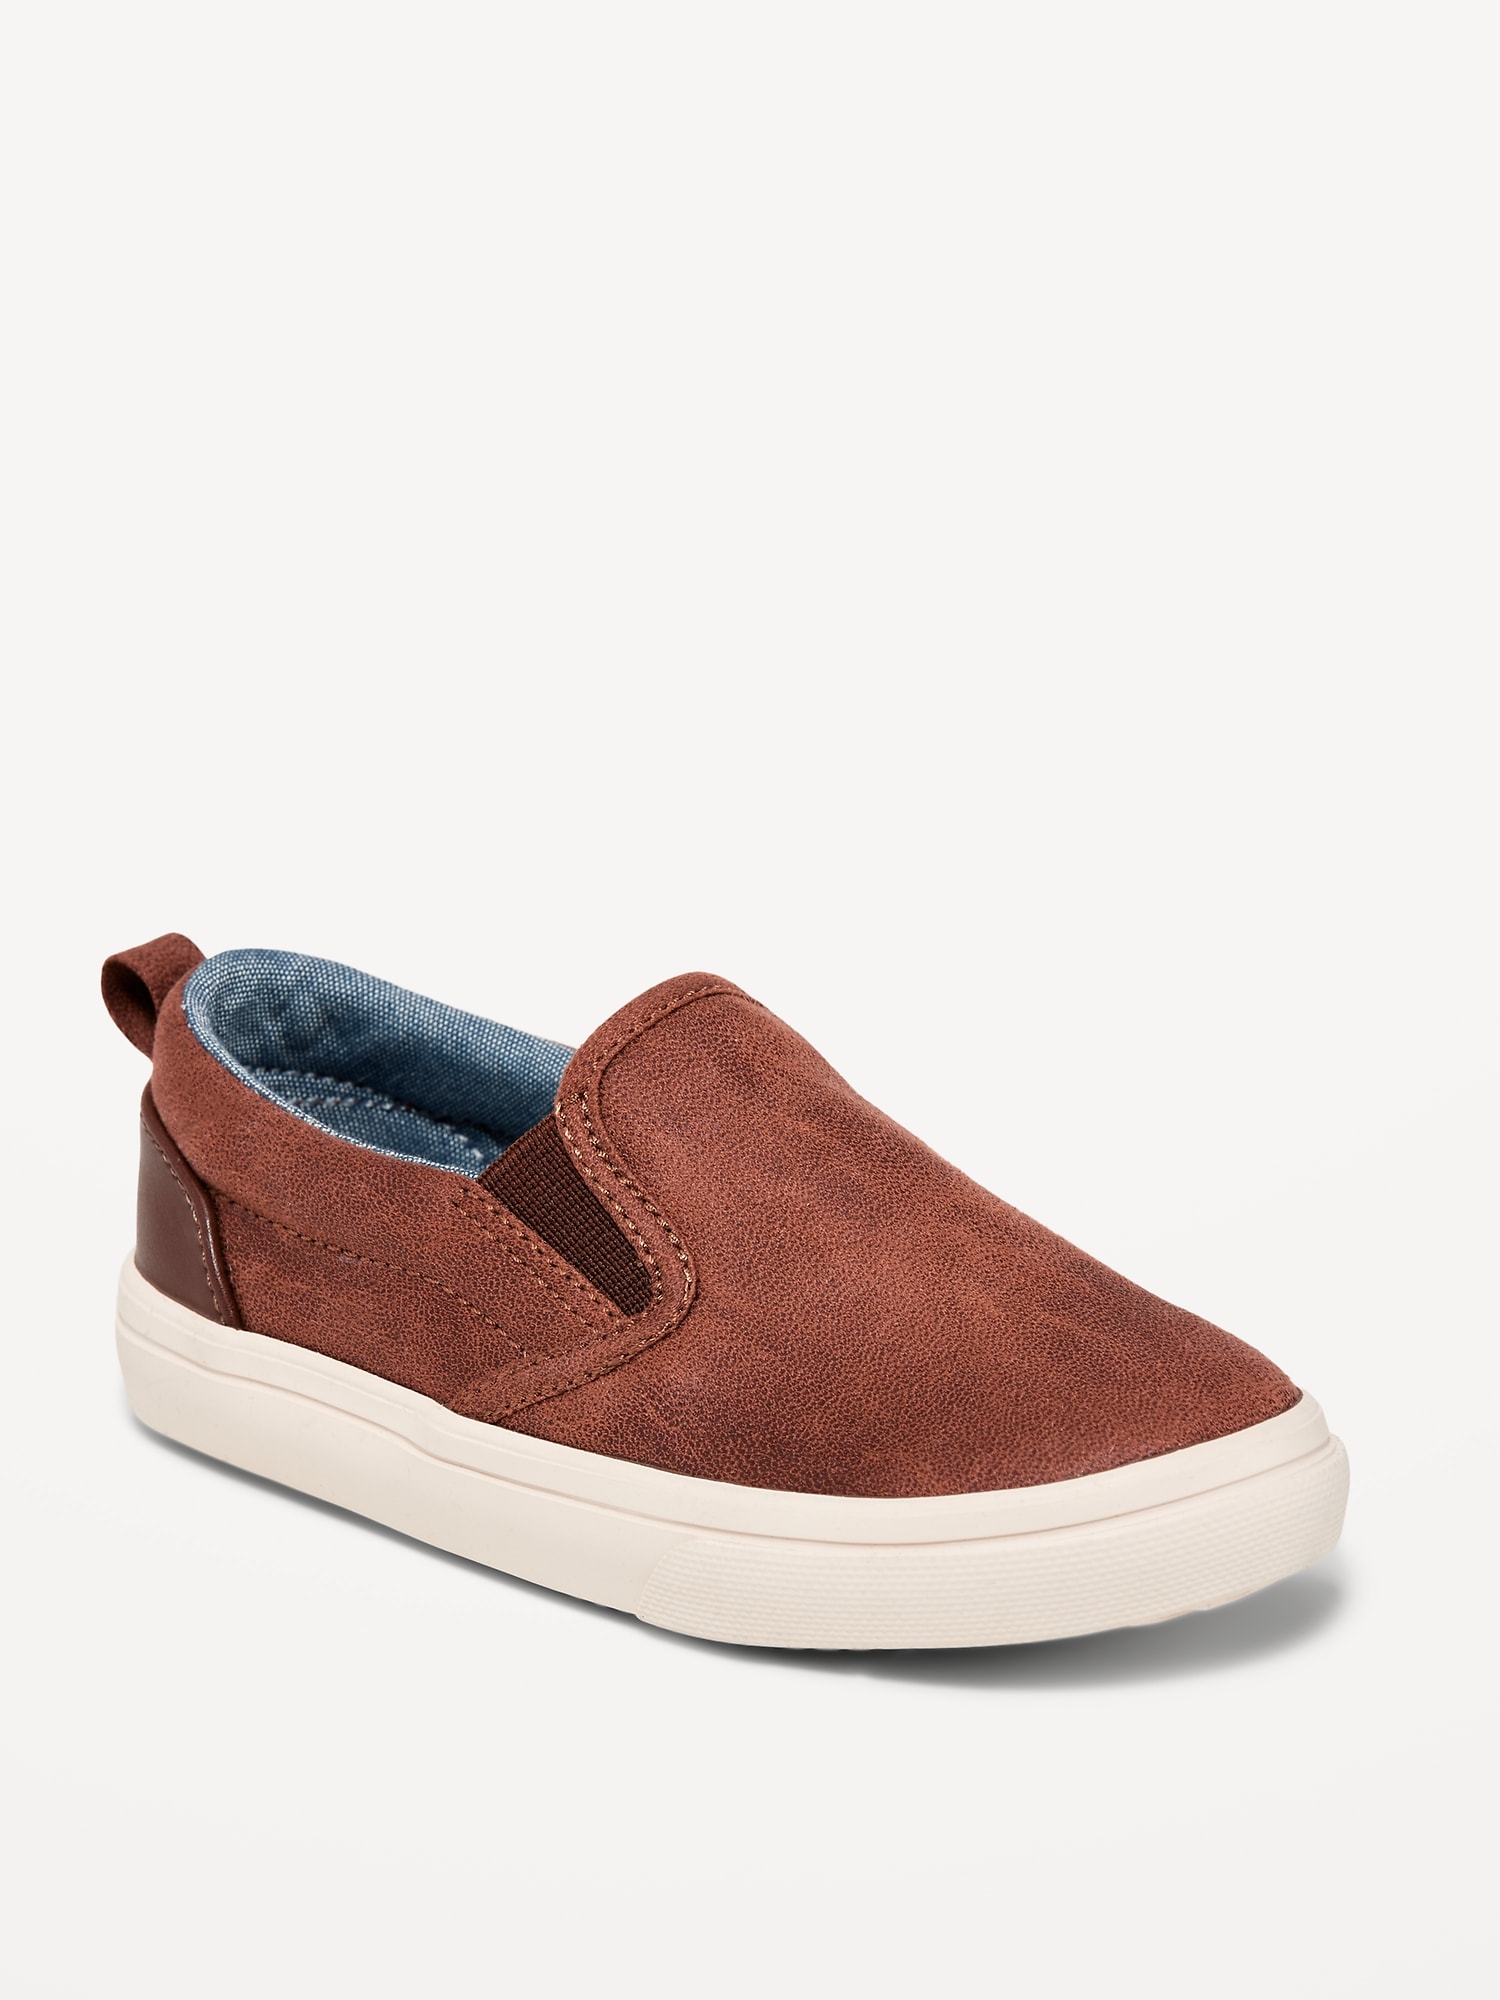 Old Navy Faux-Leather Slip-On Sneakers for Toddler Boys brown. 1